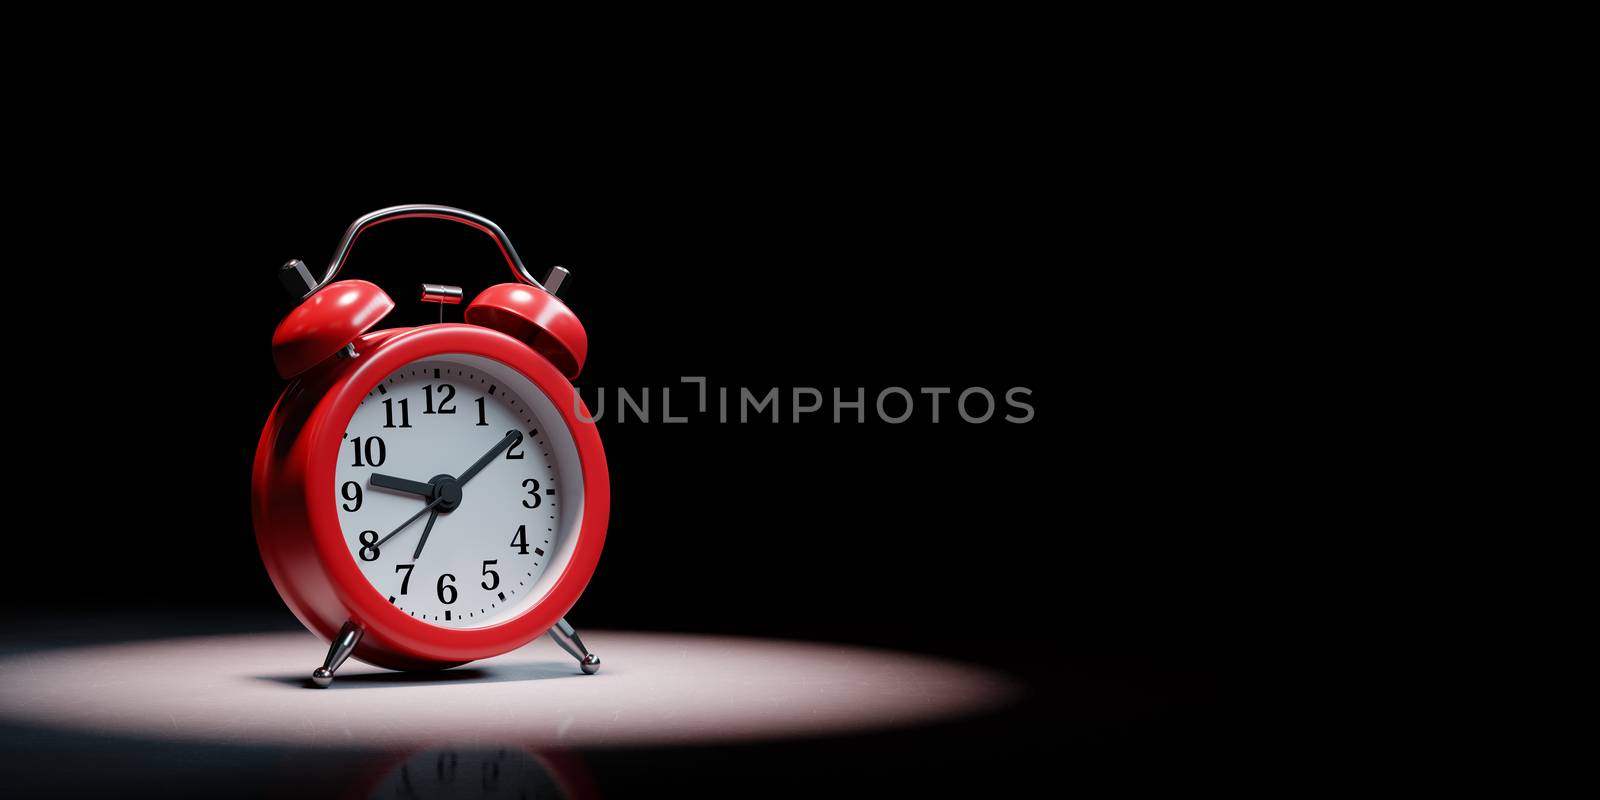 Red Classic Alarm Clock Spotlighted on Black Background with Copy Space 3D Illustration